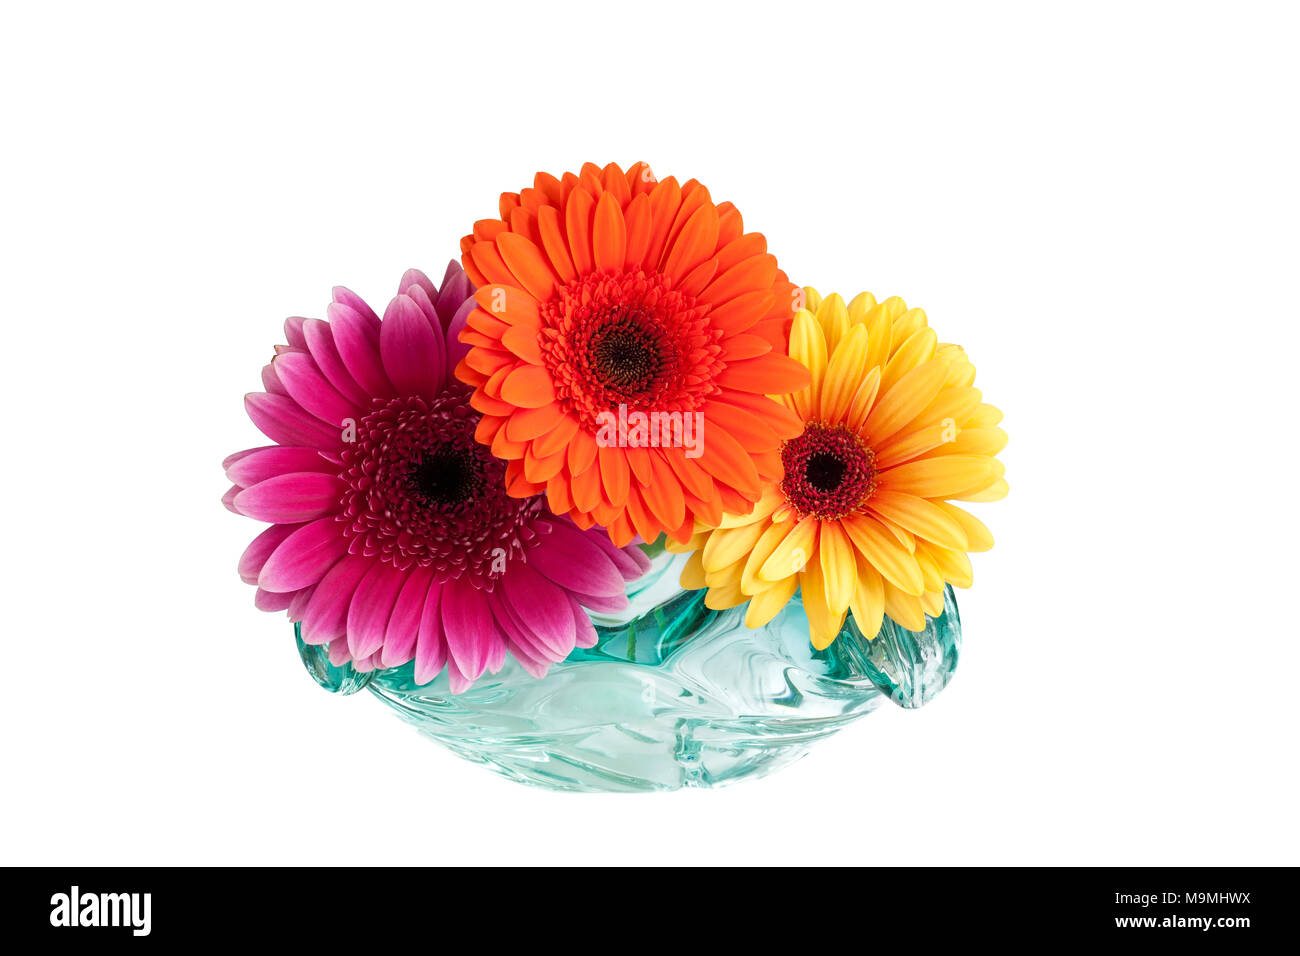 Three different coloured Gerbera hybrida daisies in a vase on a white background. Stock Photo